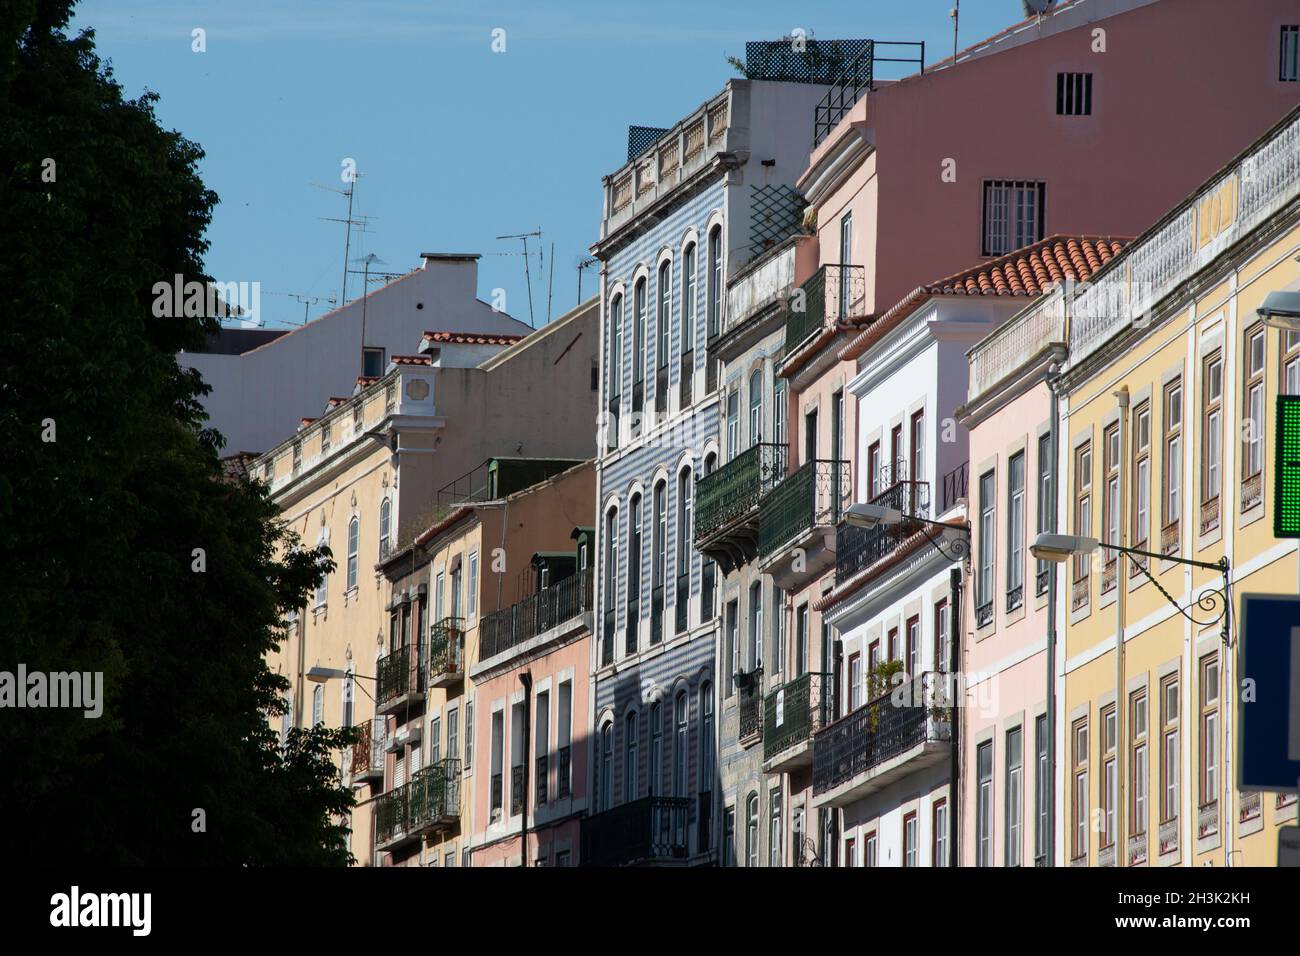 Lisbon, Portugal. Typical architecture of central Lisbon Stock Photo